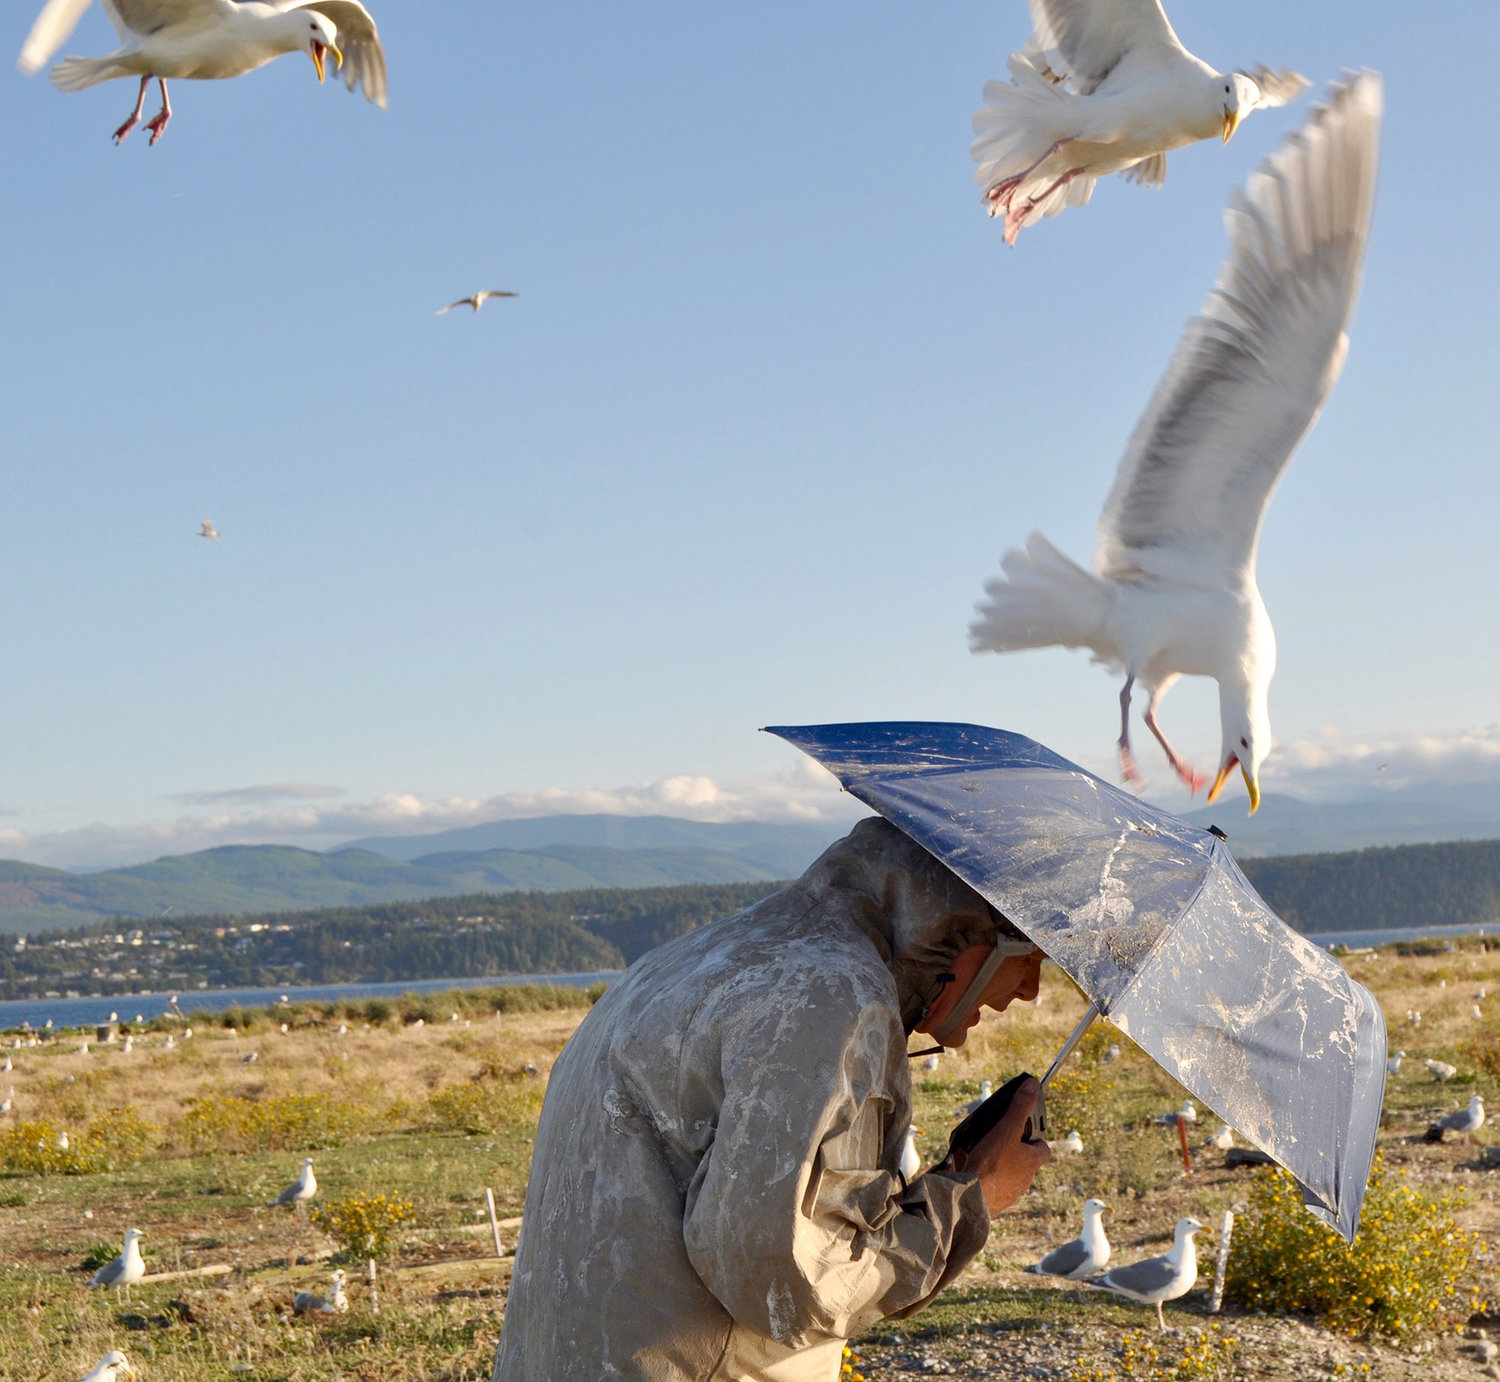 In this photo taken on July 13, 2016, biologist Jim Hayward shields himself with an umbrella while visiting a large gull nesting colony on Protection Island, a wildlife refuge in the Strait of Juan de Fuca, near Port Townsend, Wash. Hayward's research has found that climate change is triggering cannibalism among nesting gulls. (Tristan Baurick/Kitsap Sun via AP)